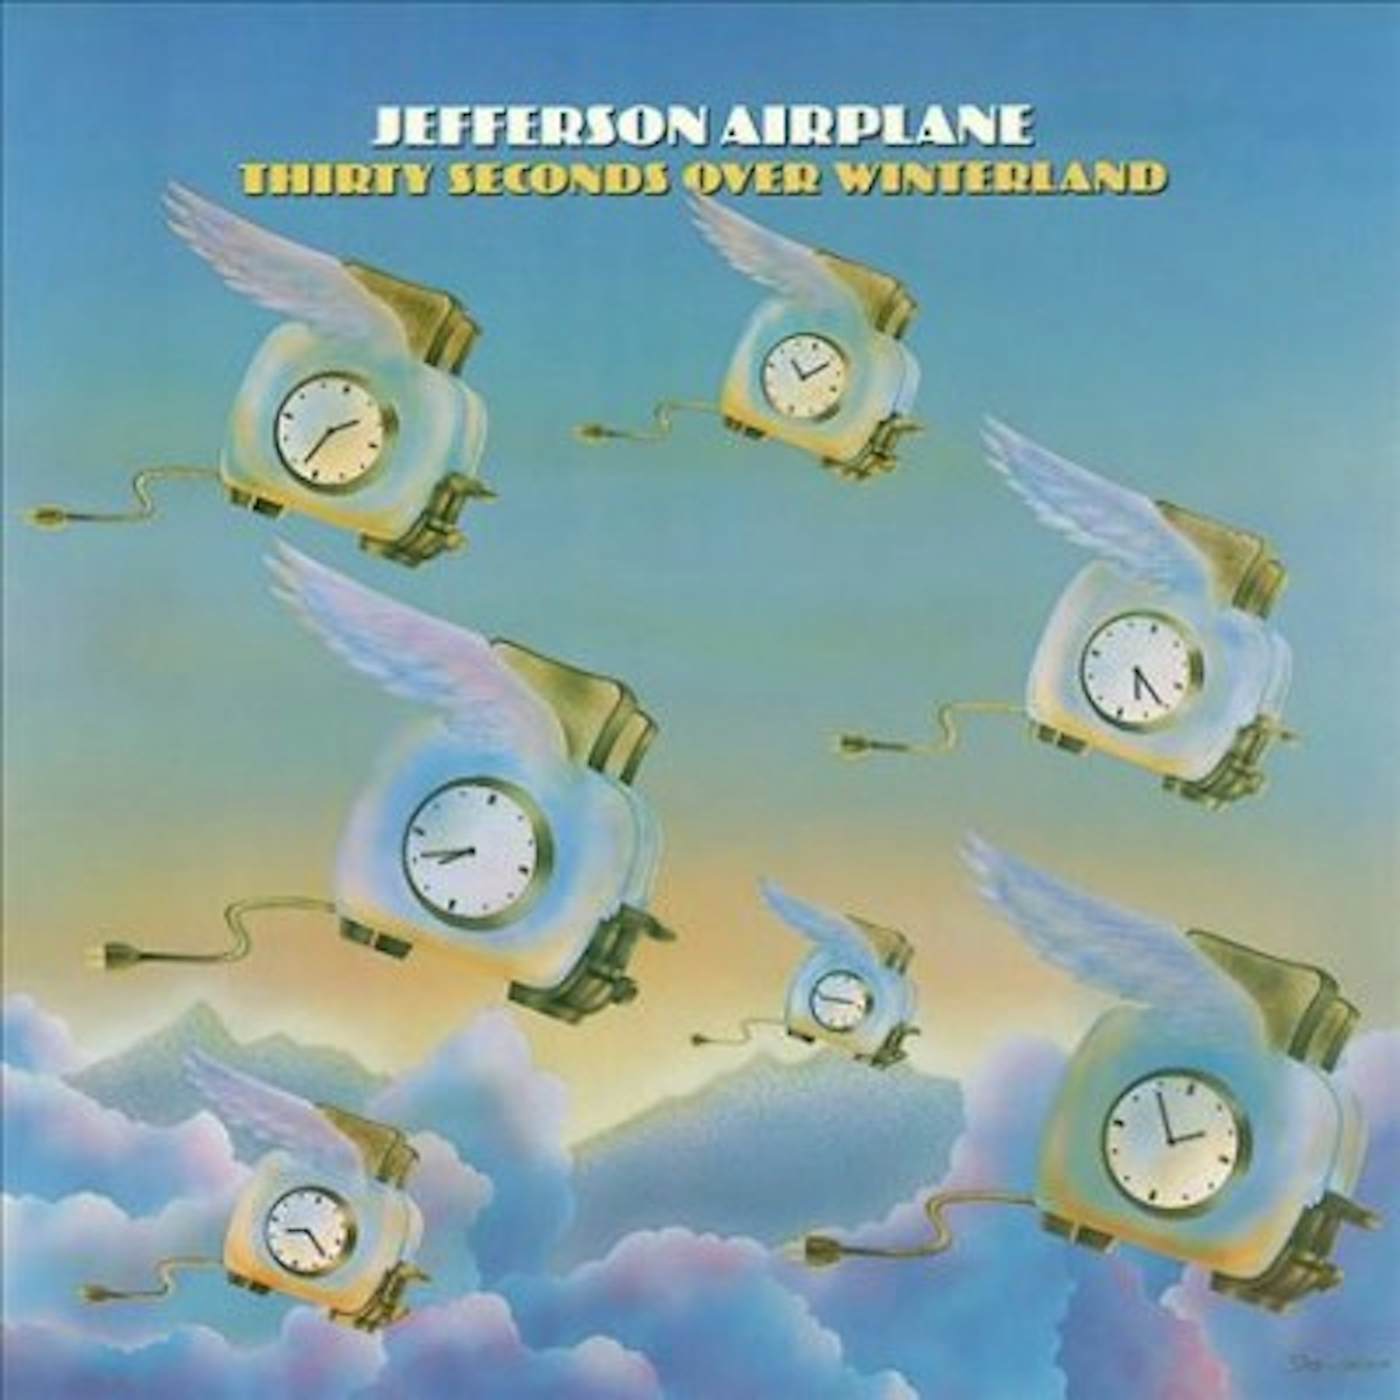 Jefferson Airplane THIRTY SECONDS OVER WINTERLAND (COLORED VINYL) (SUMMER OF 69) Vinyl Record